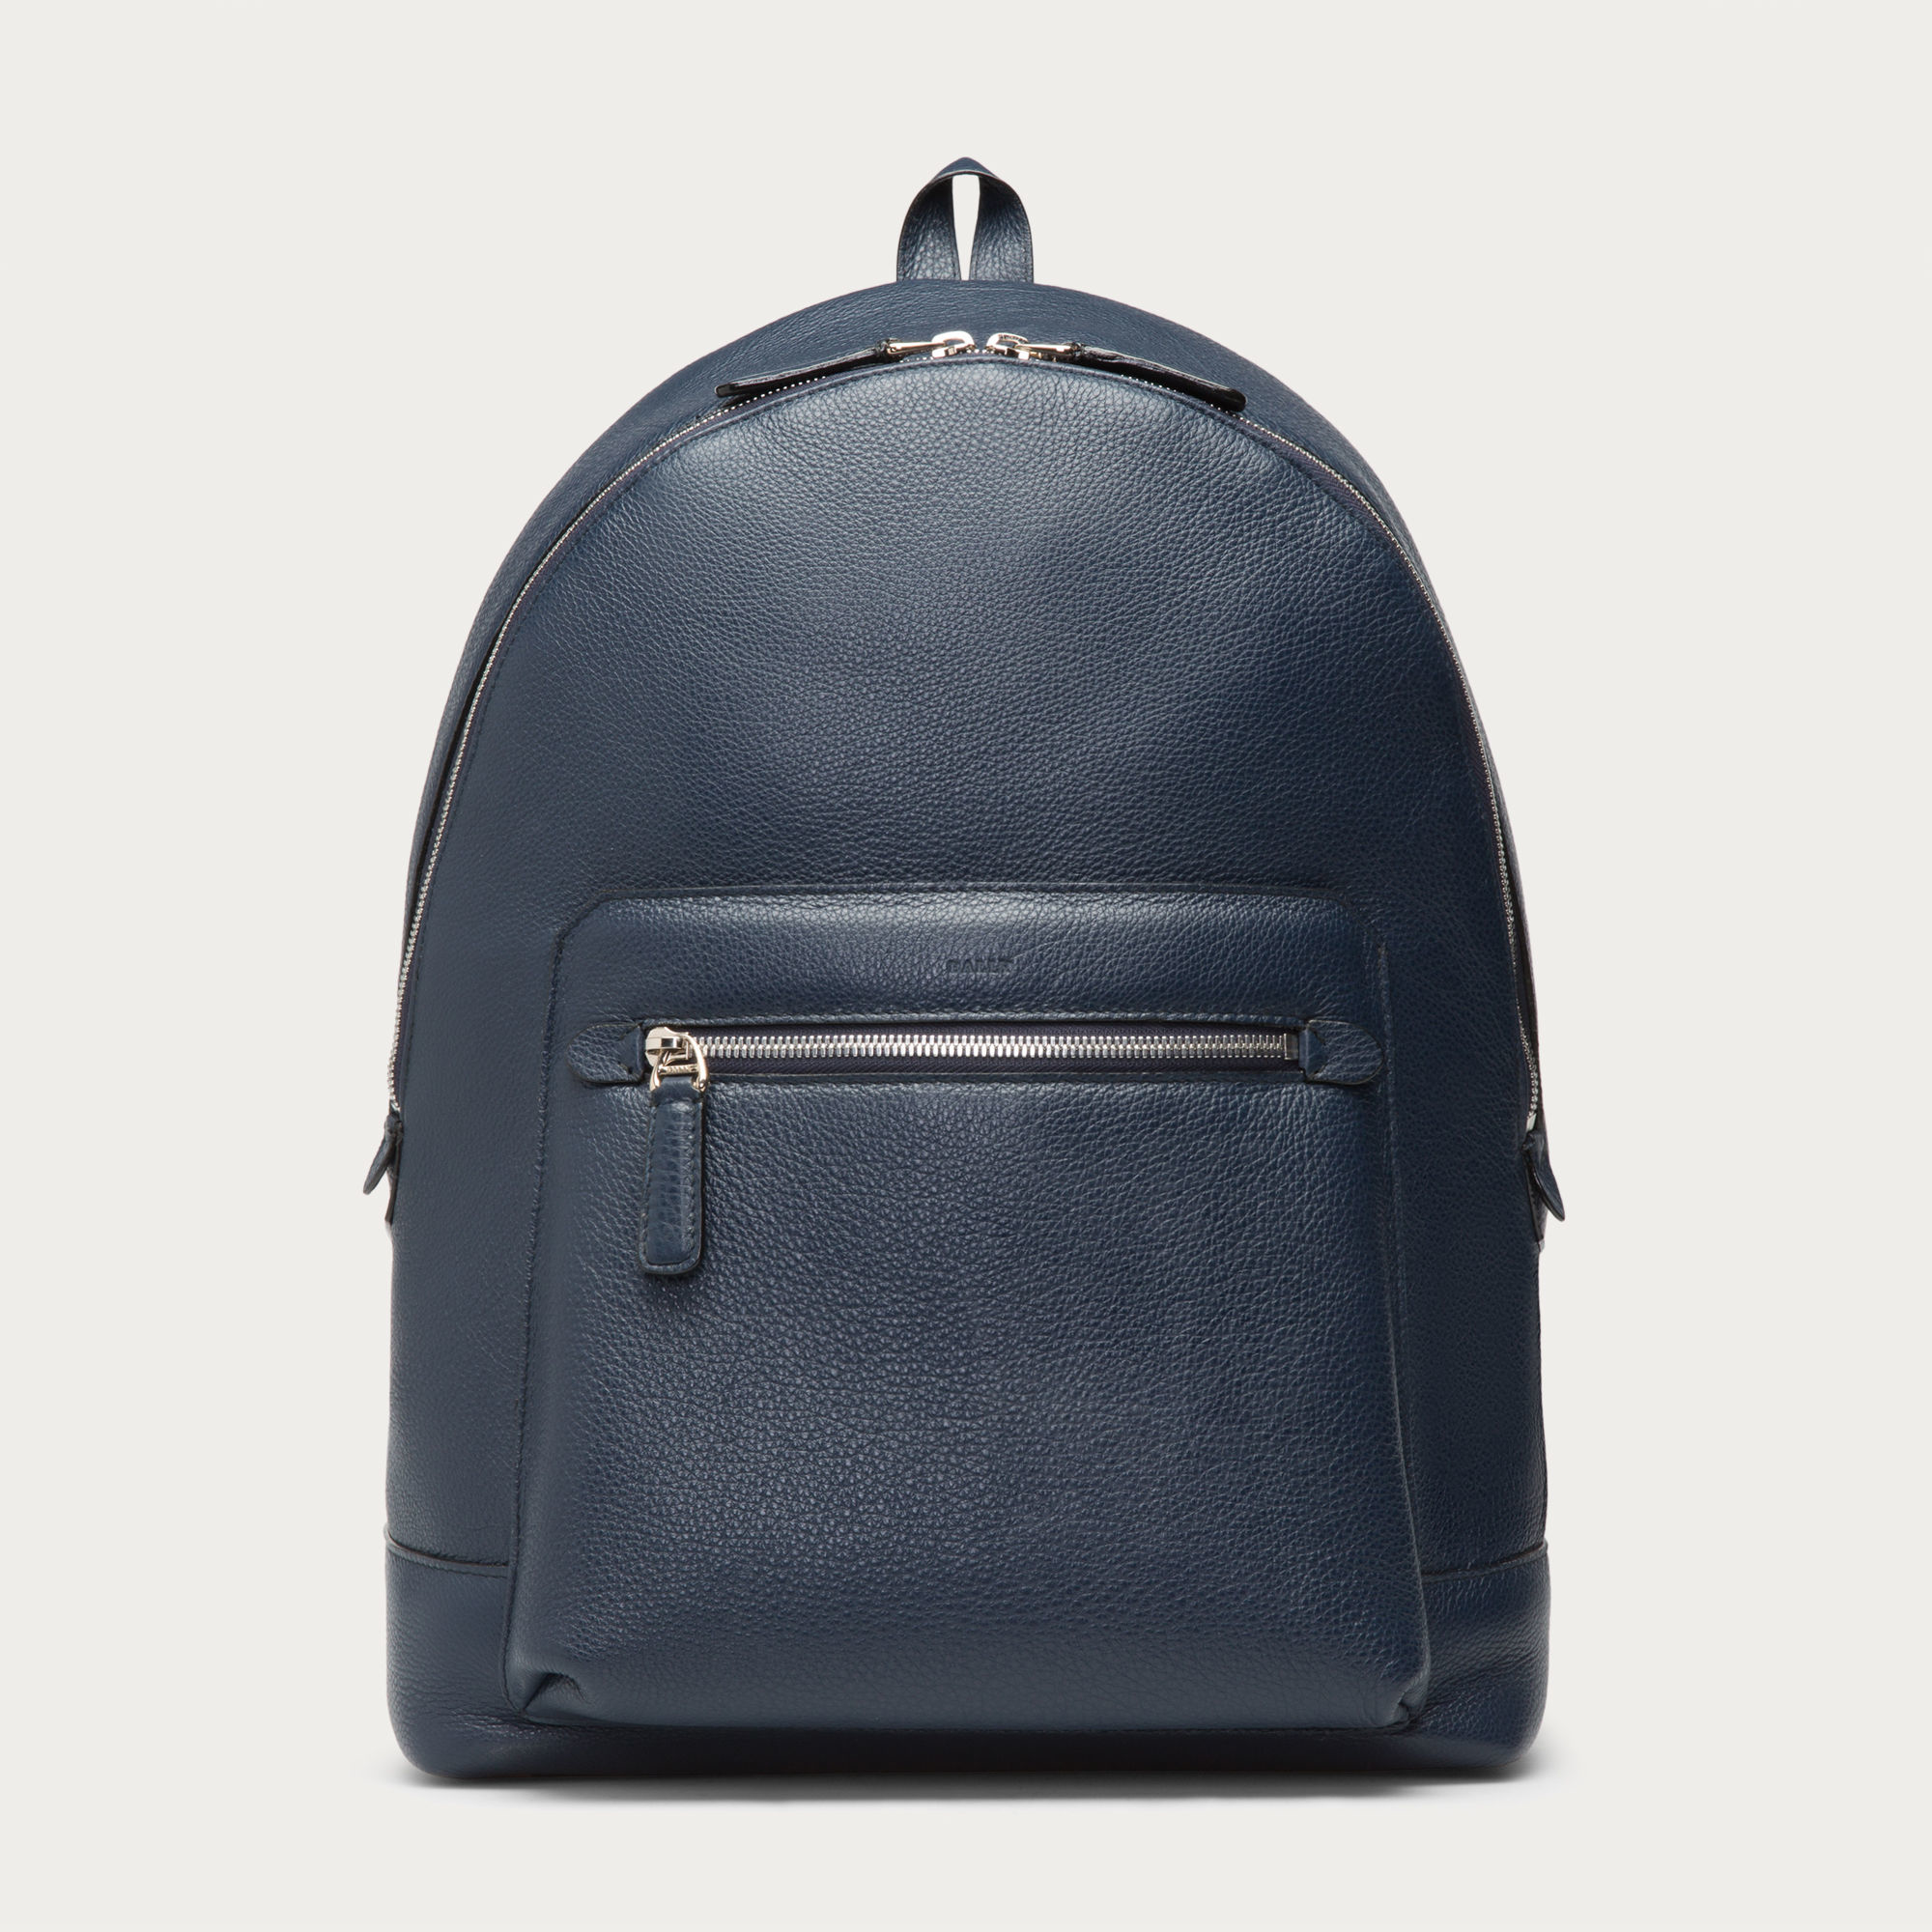 Bally Messi Leather Backpack in Navy (Blue) for Men - Lyst